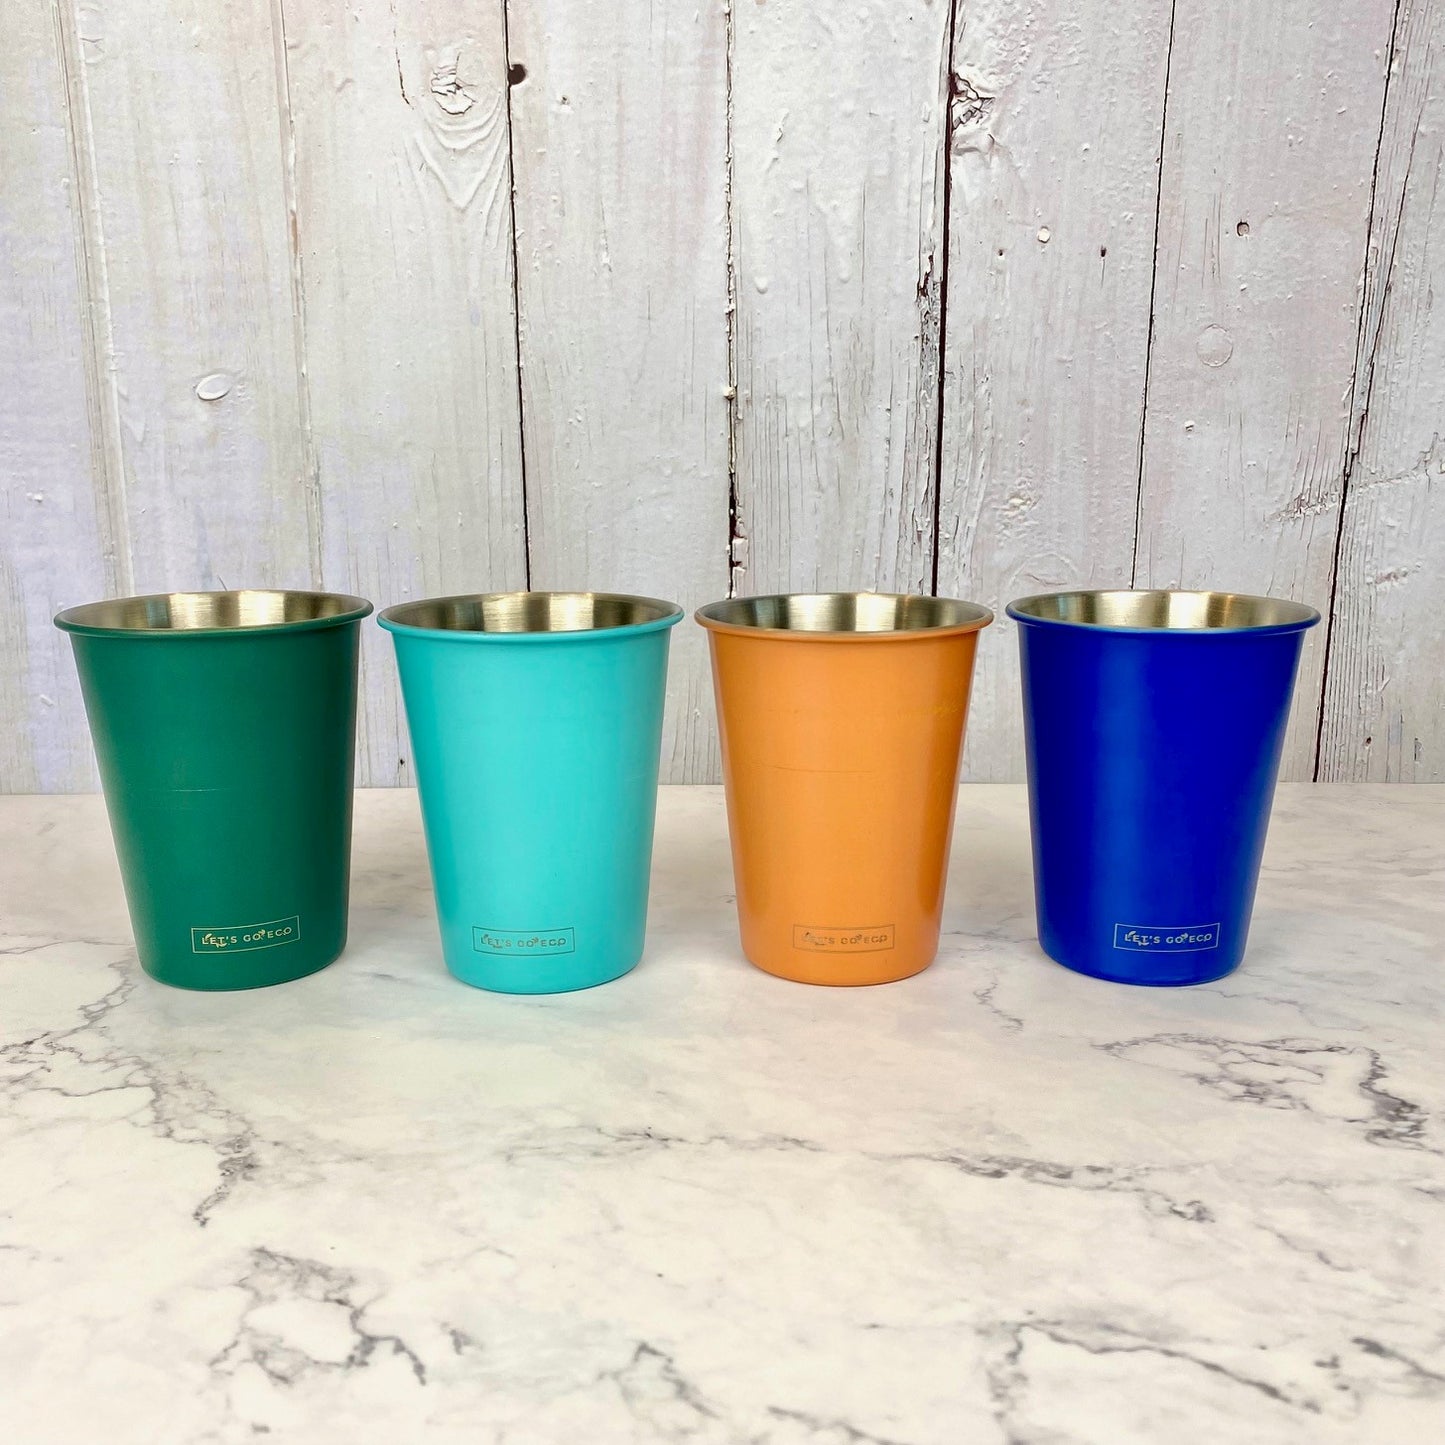 Stainless Steel Reusable Cups - patio and party cups (set of 4)